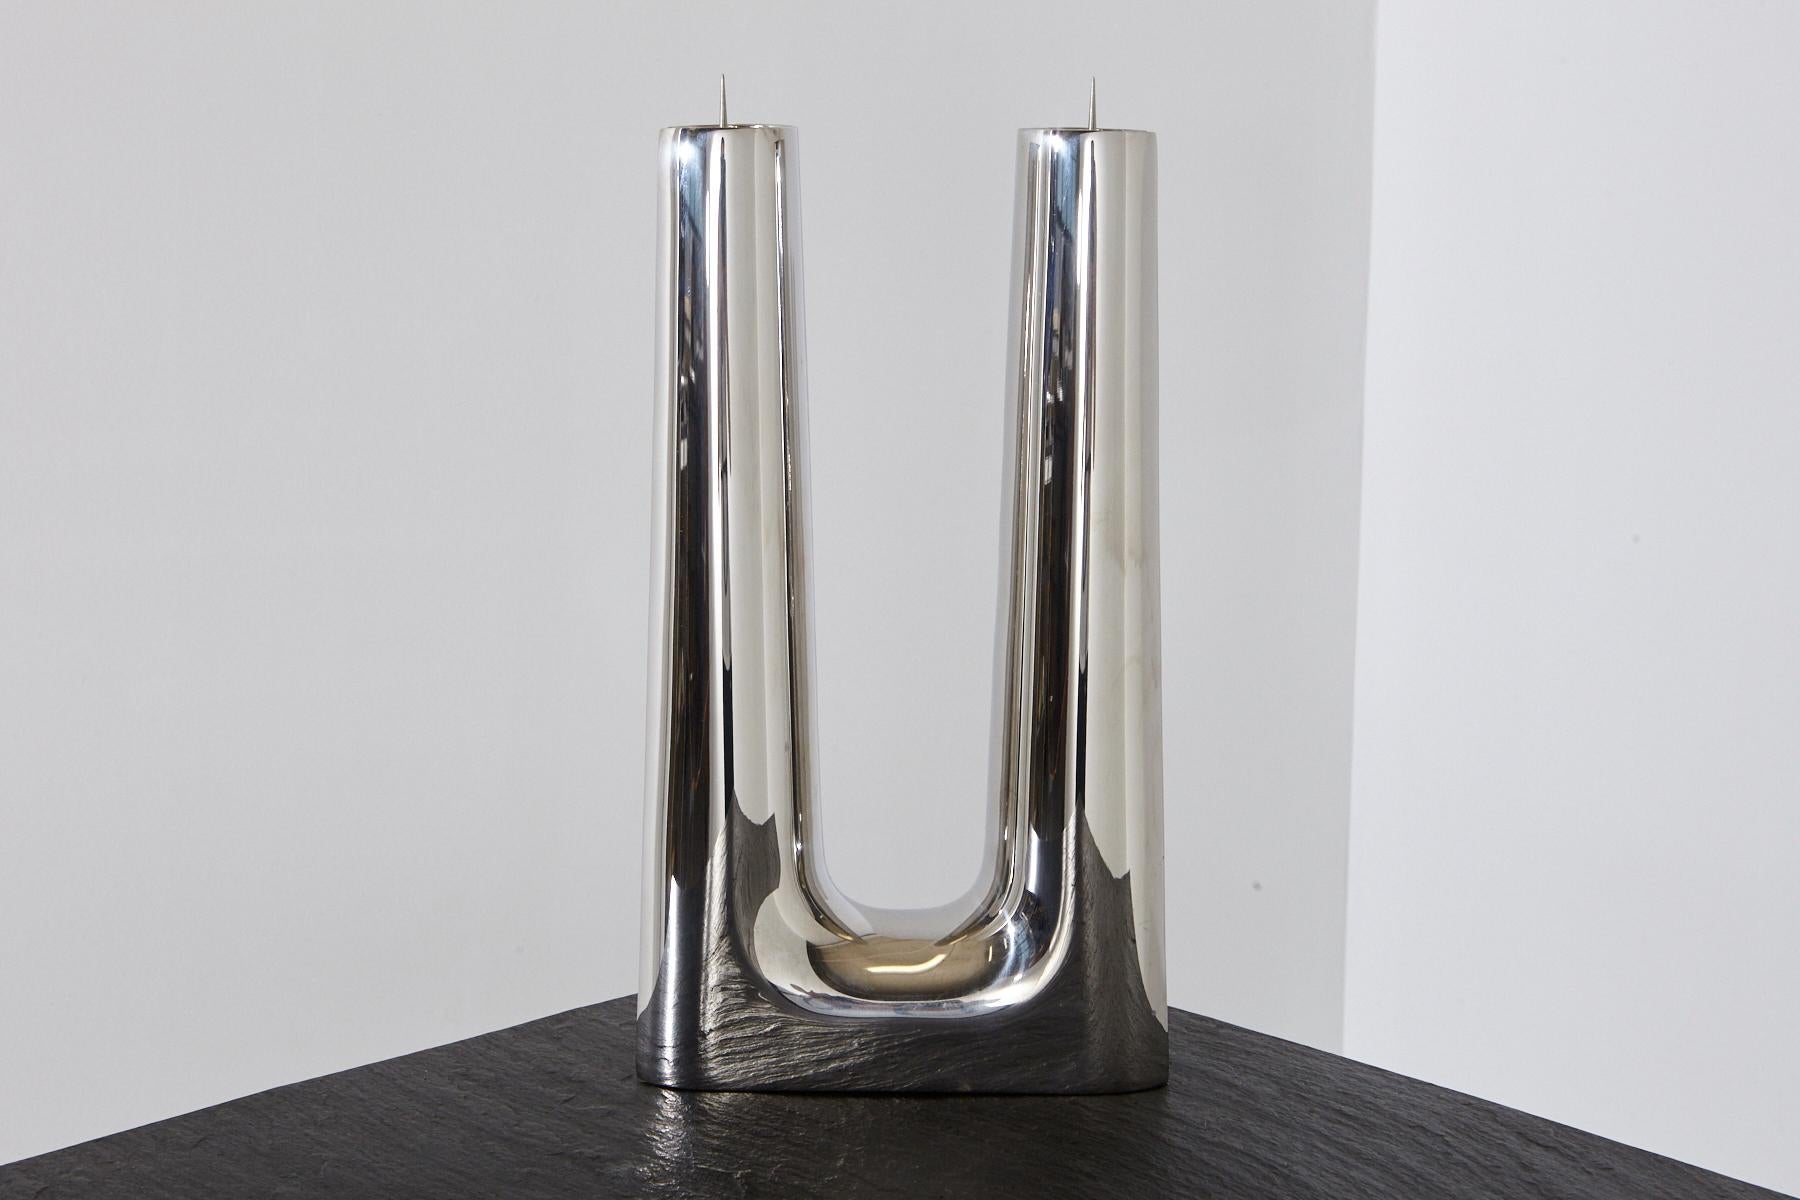 A modern, simple, Minimalist polished stainless steel candleholder by Georg Jensen for two candles.
The candleholder has some minor scratches to the surface consistent to use.
  